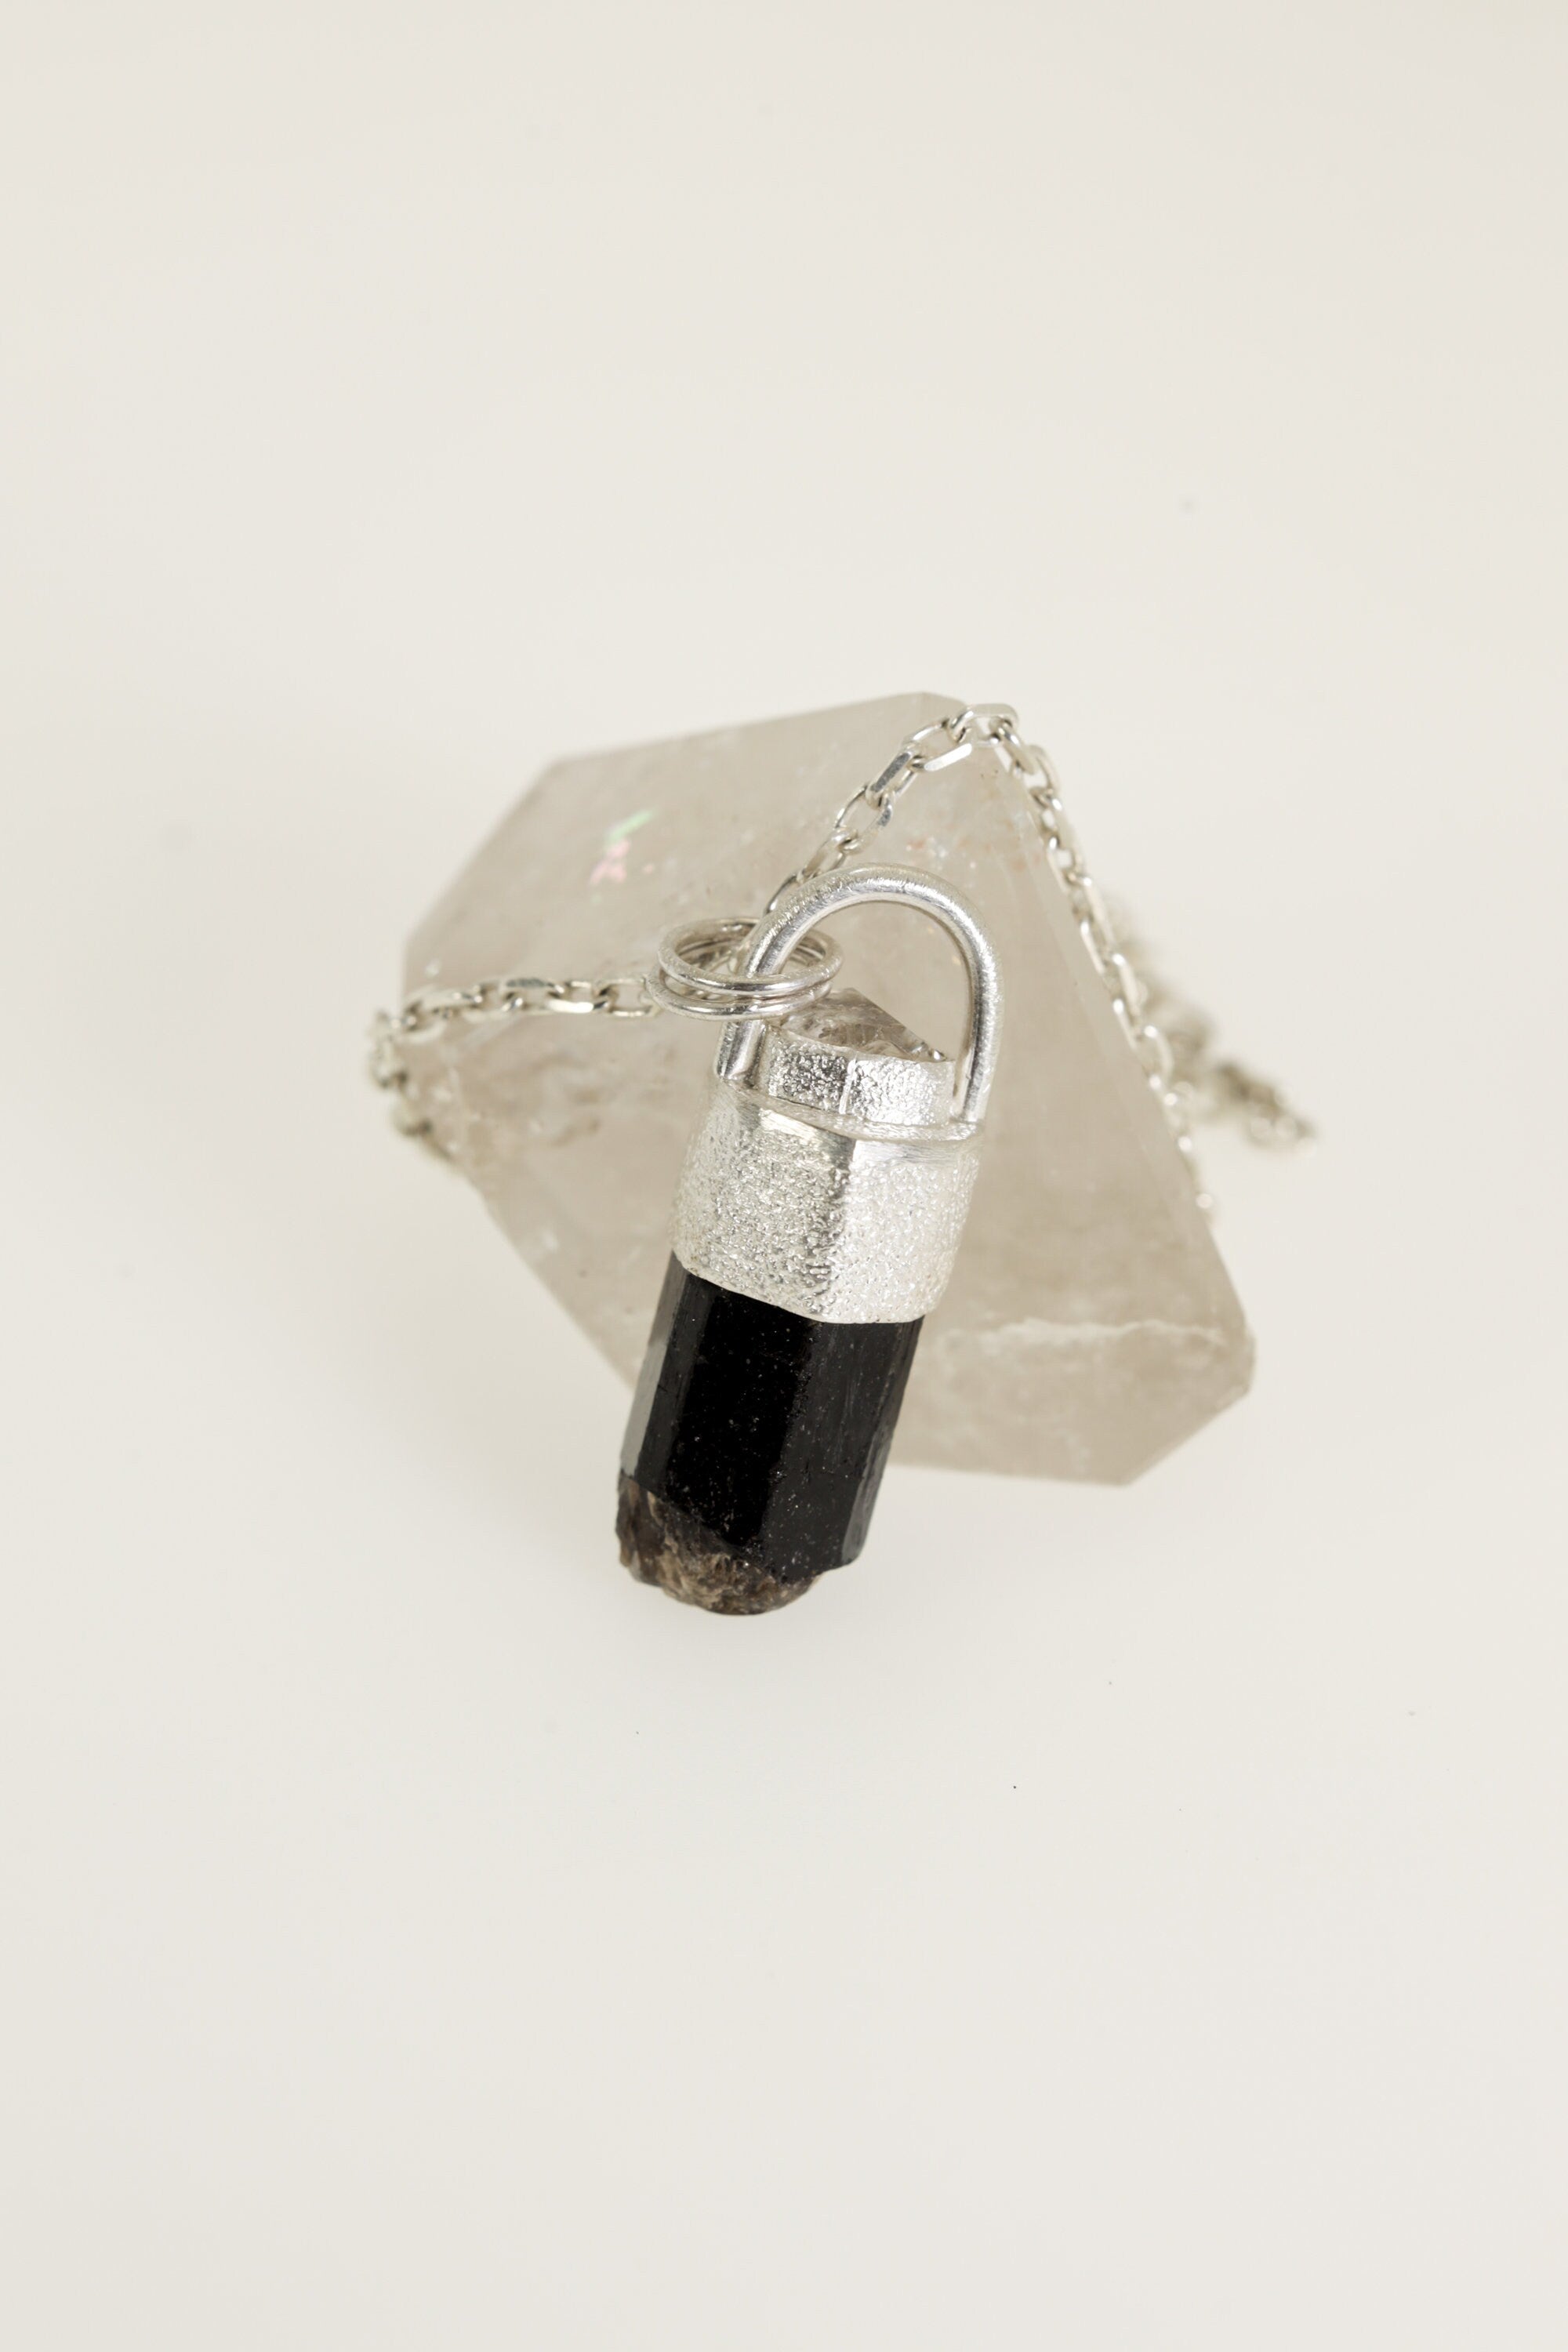 Earthen Brilliance: Sterling Silver Pendant with Himalayan Terminated Brown Dravite Tourmaline and Diamond - Sand Texture Finish - NO/08